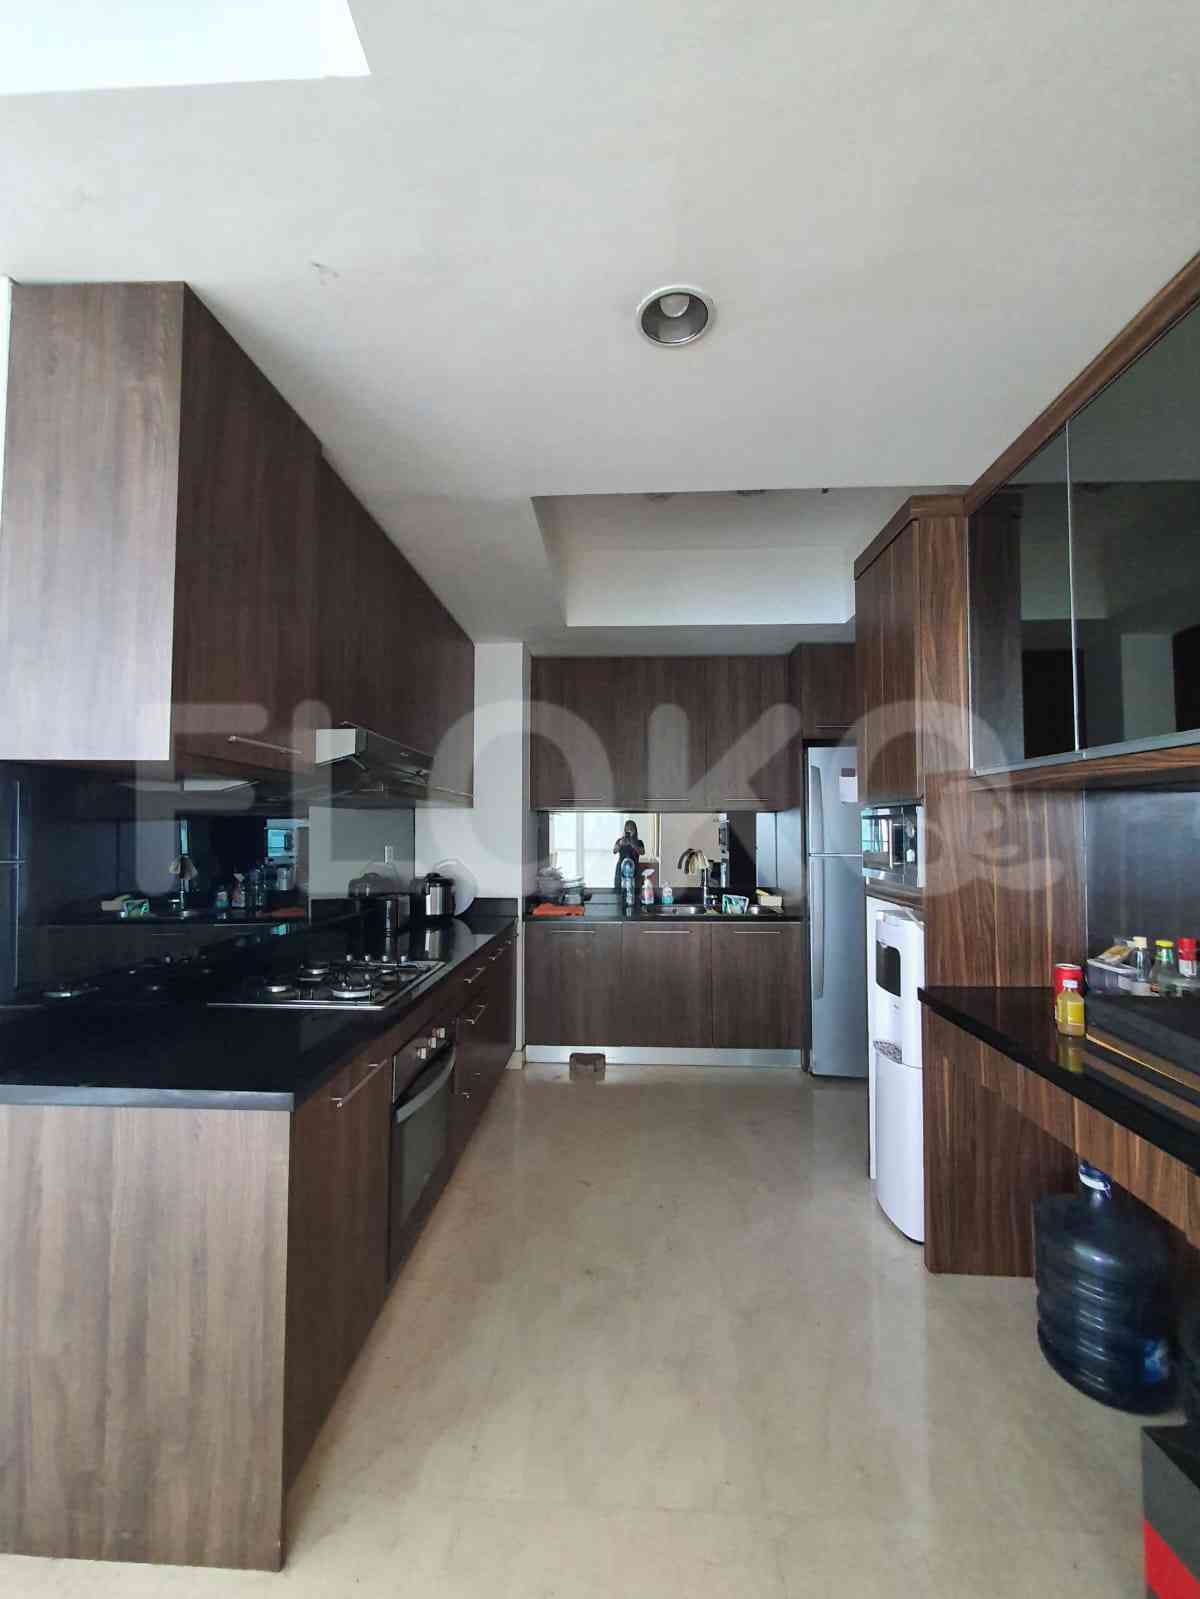 3 Bedroom on 15th Floor for Rent in Kemang Village Residence - fked84 8